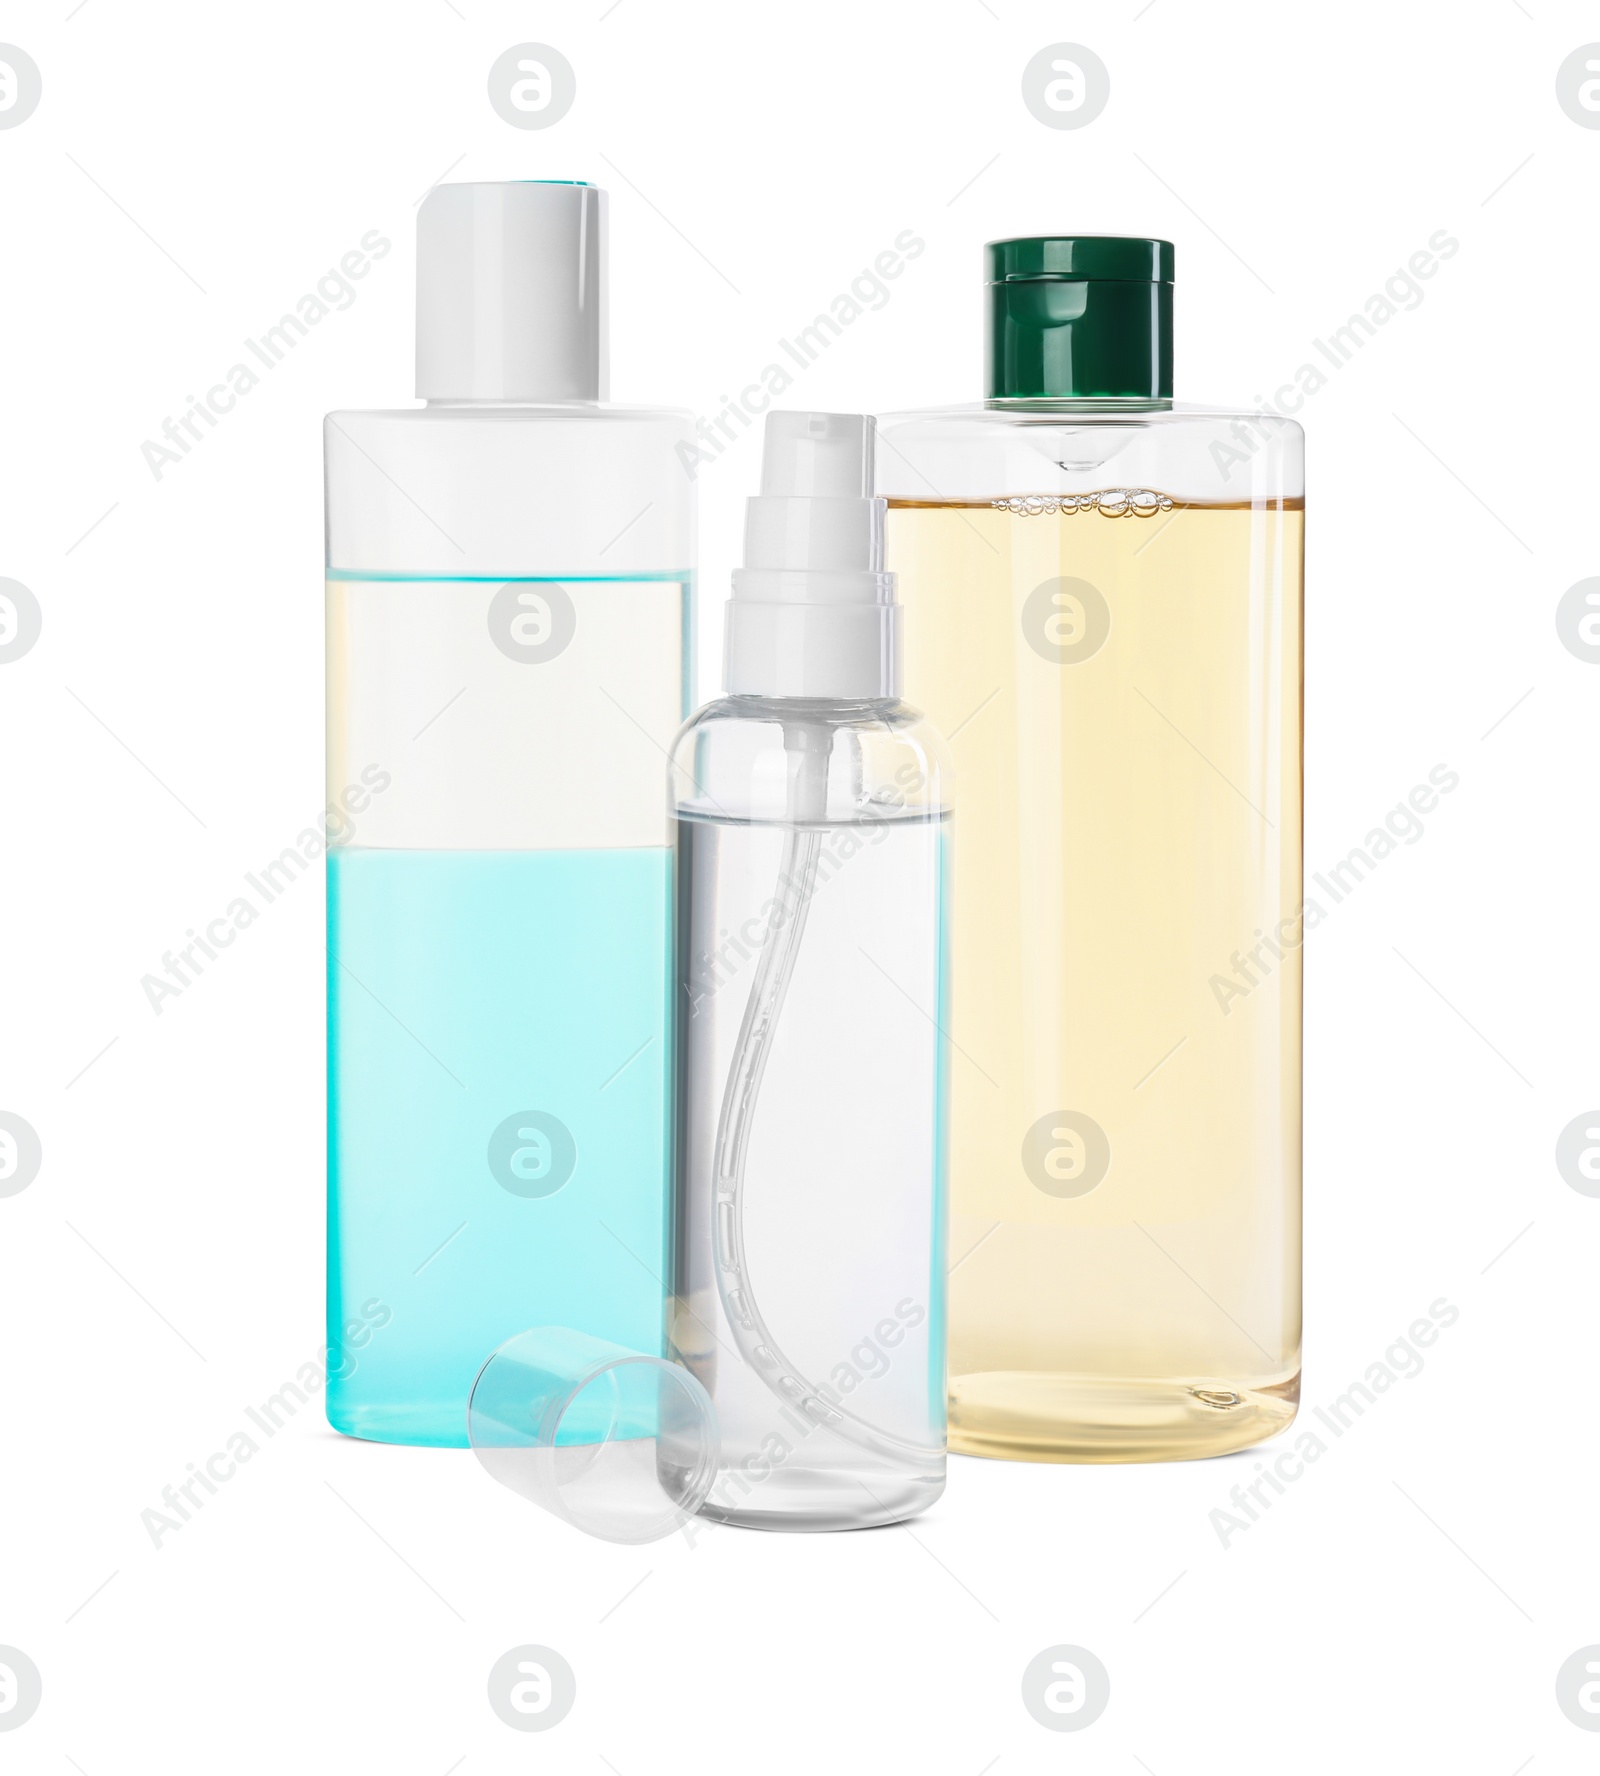 Photo of Bottles of micellar cleansing water on white background